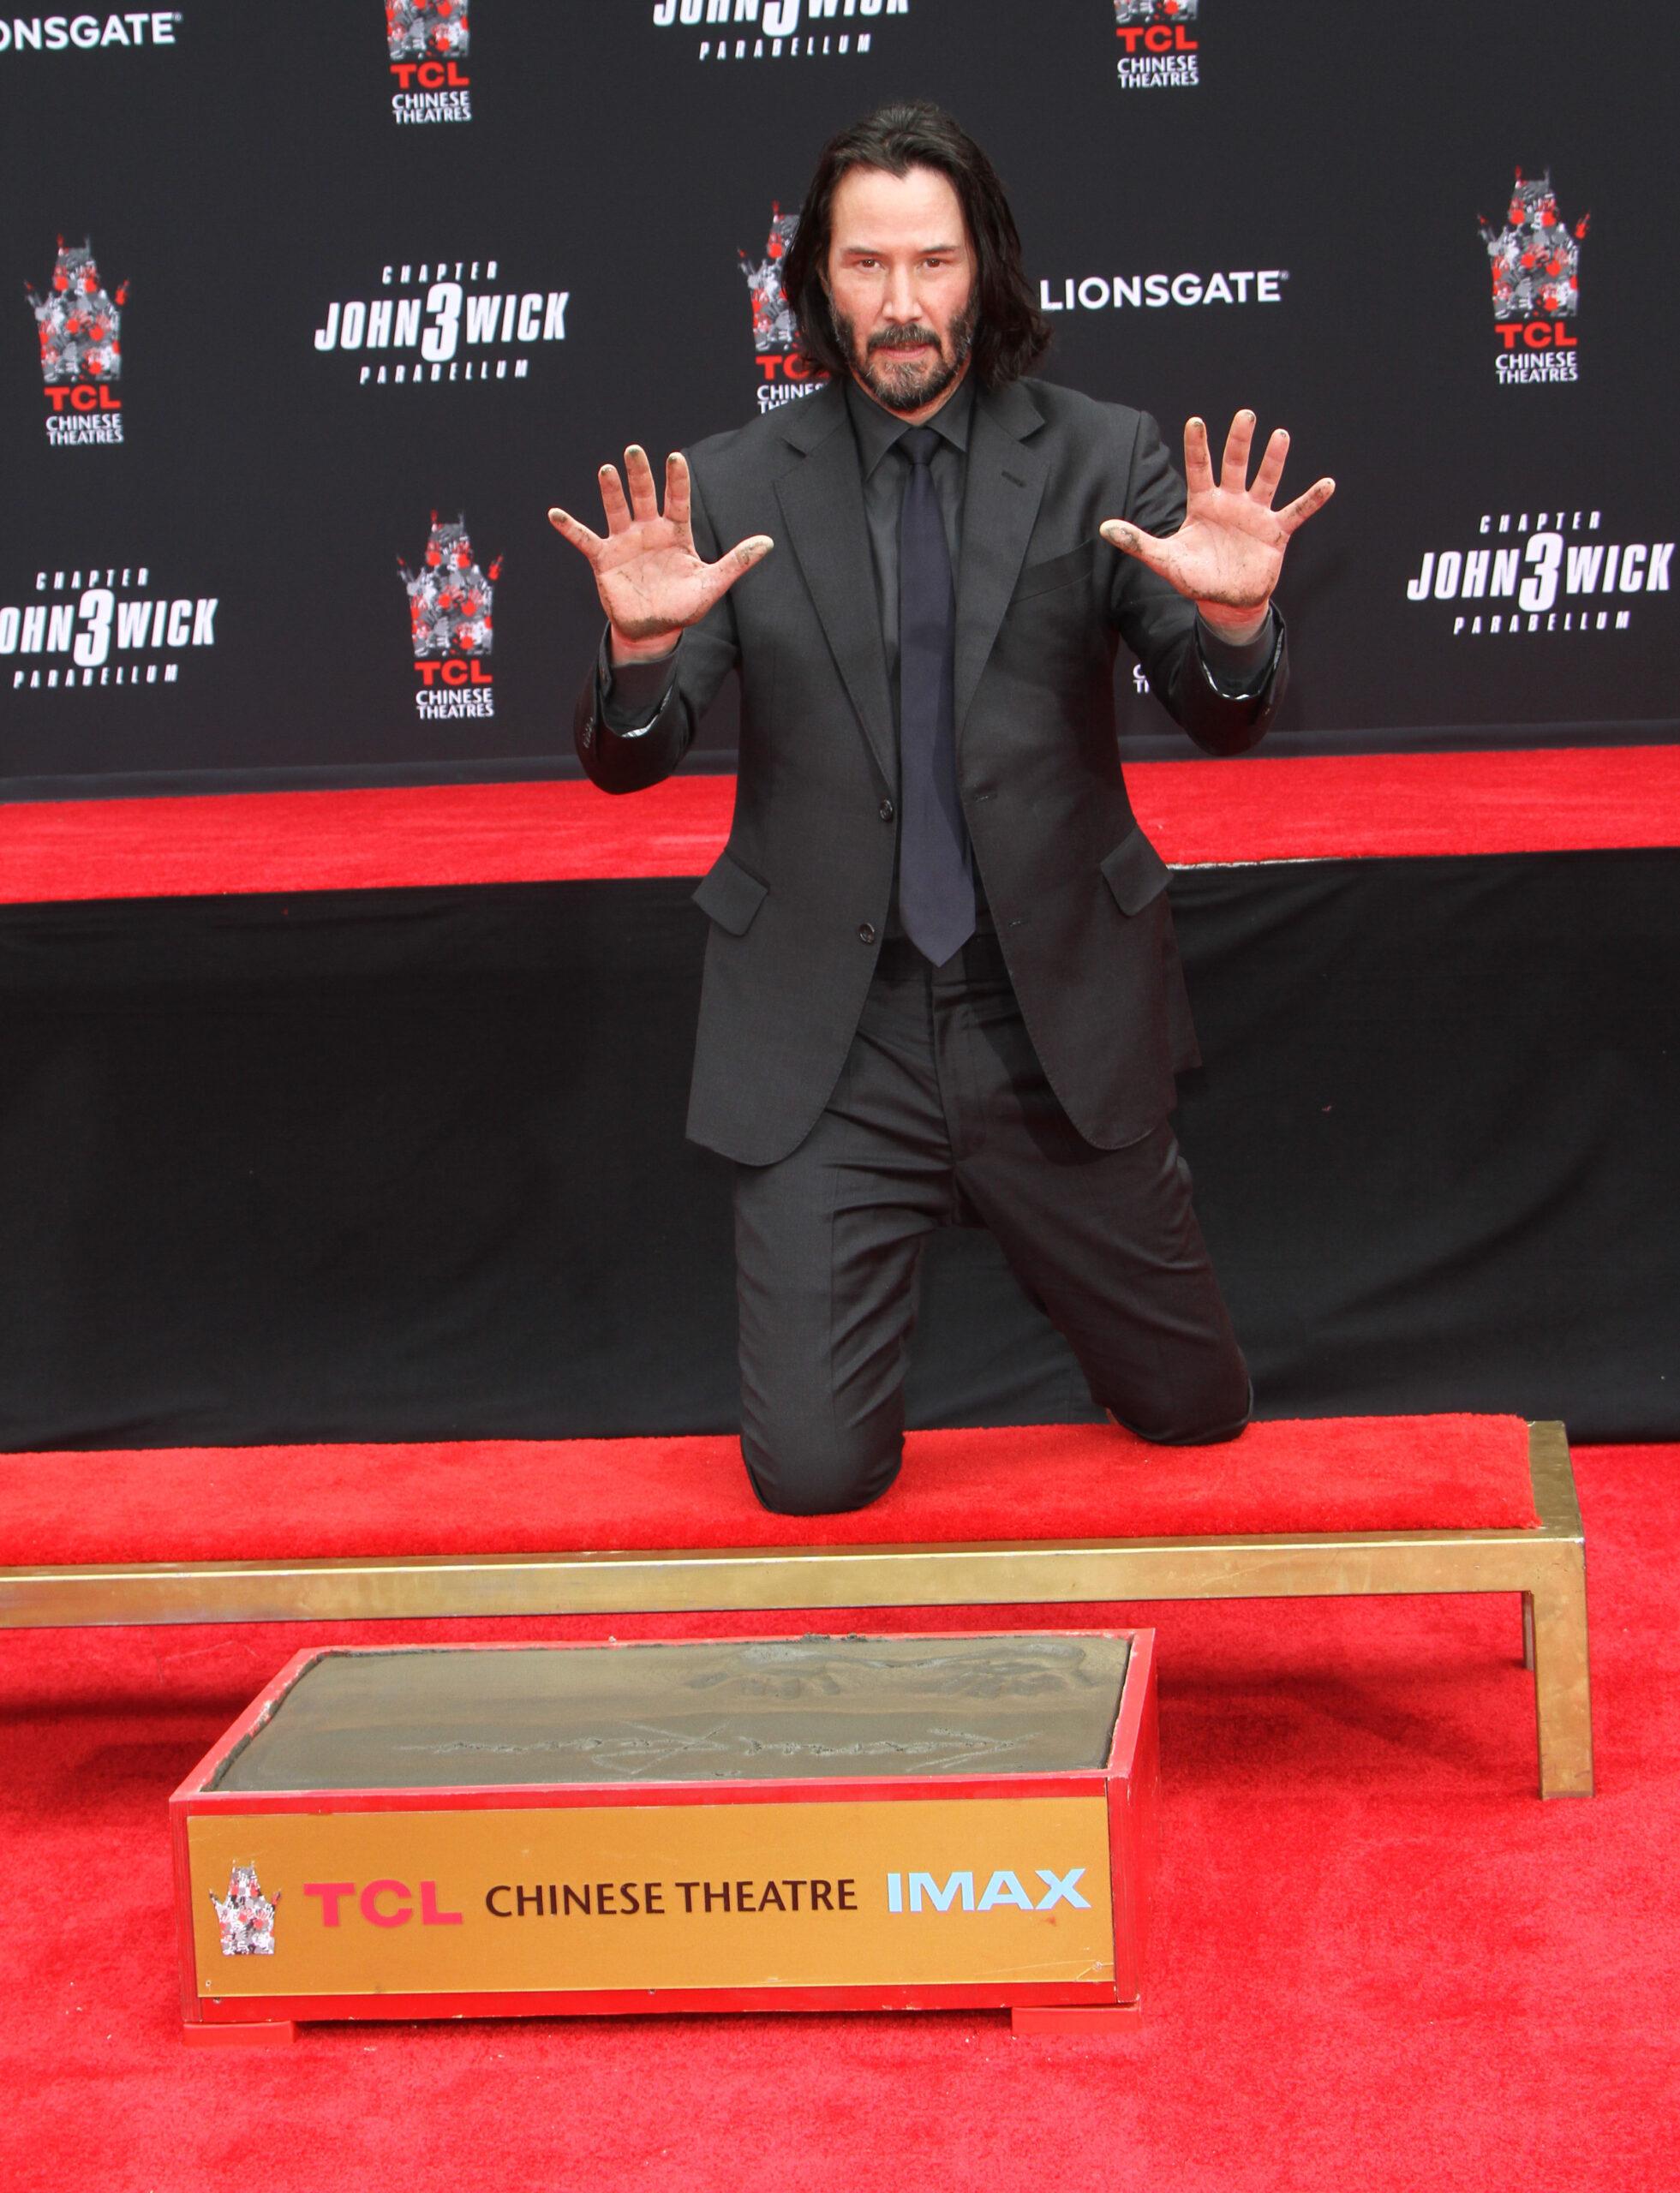 Keanu Reeves hands and footprints in ceremony in cement in Los Angeles